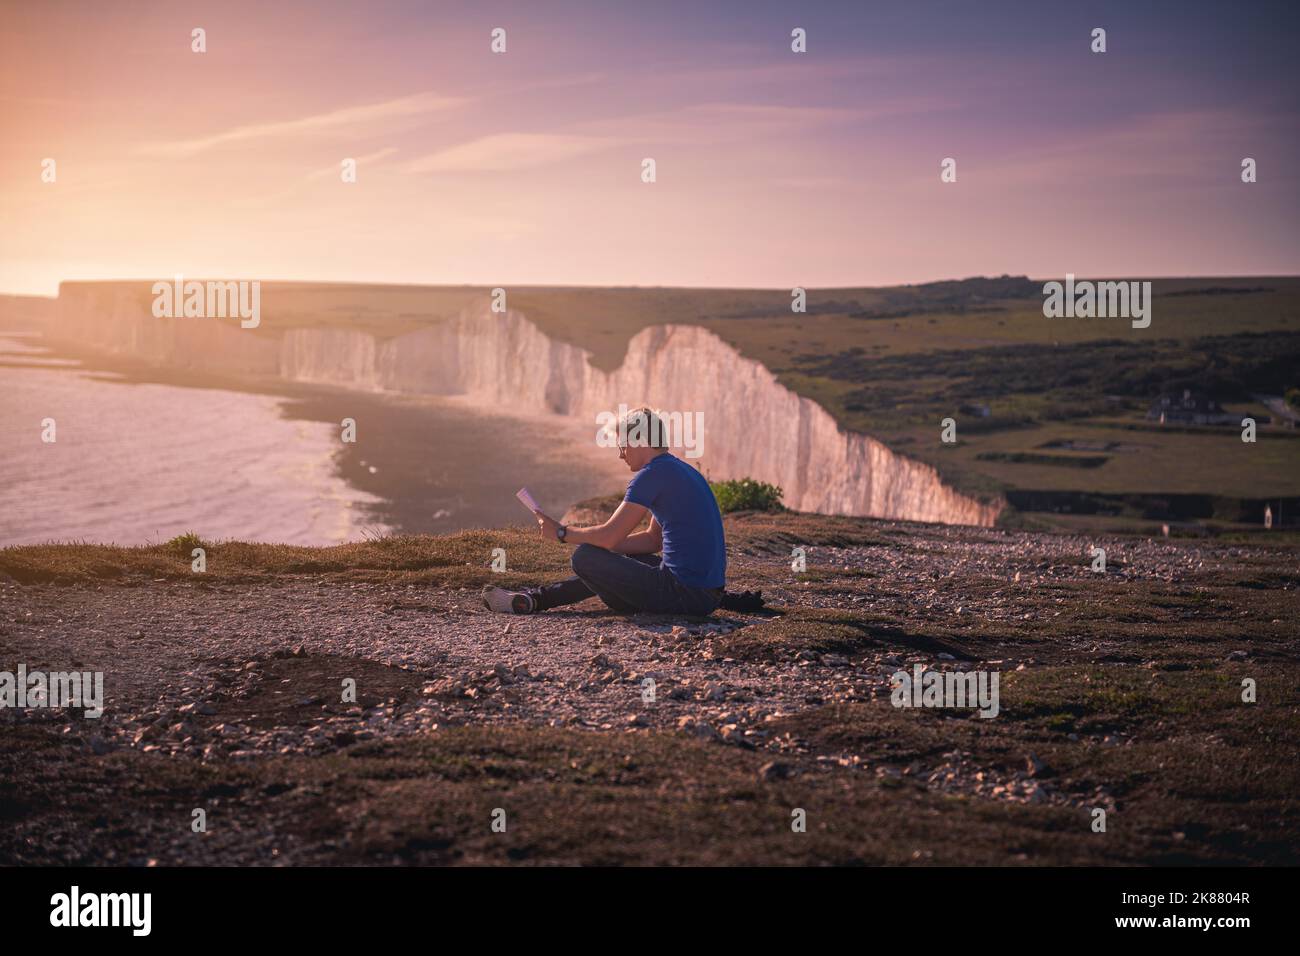 A man sitting on a rocky cliff watching the Seven Sisters cliffs in Eastbourne, United Kingdom at sunset Stock Photo